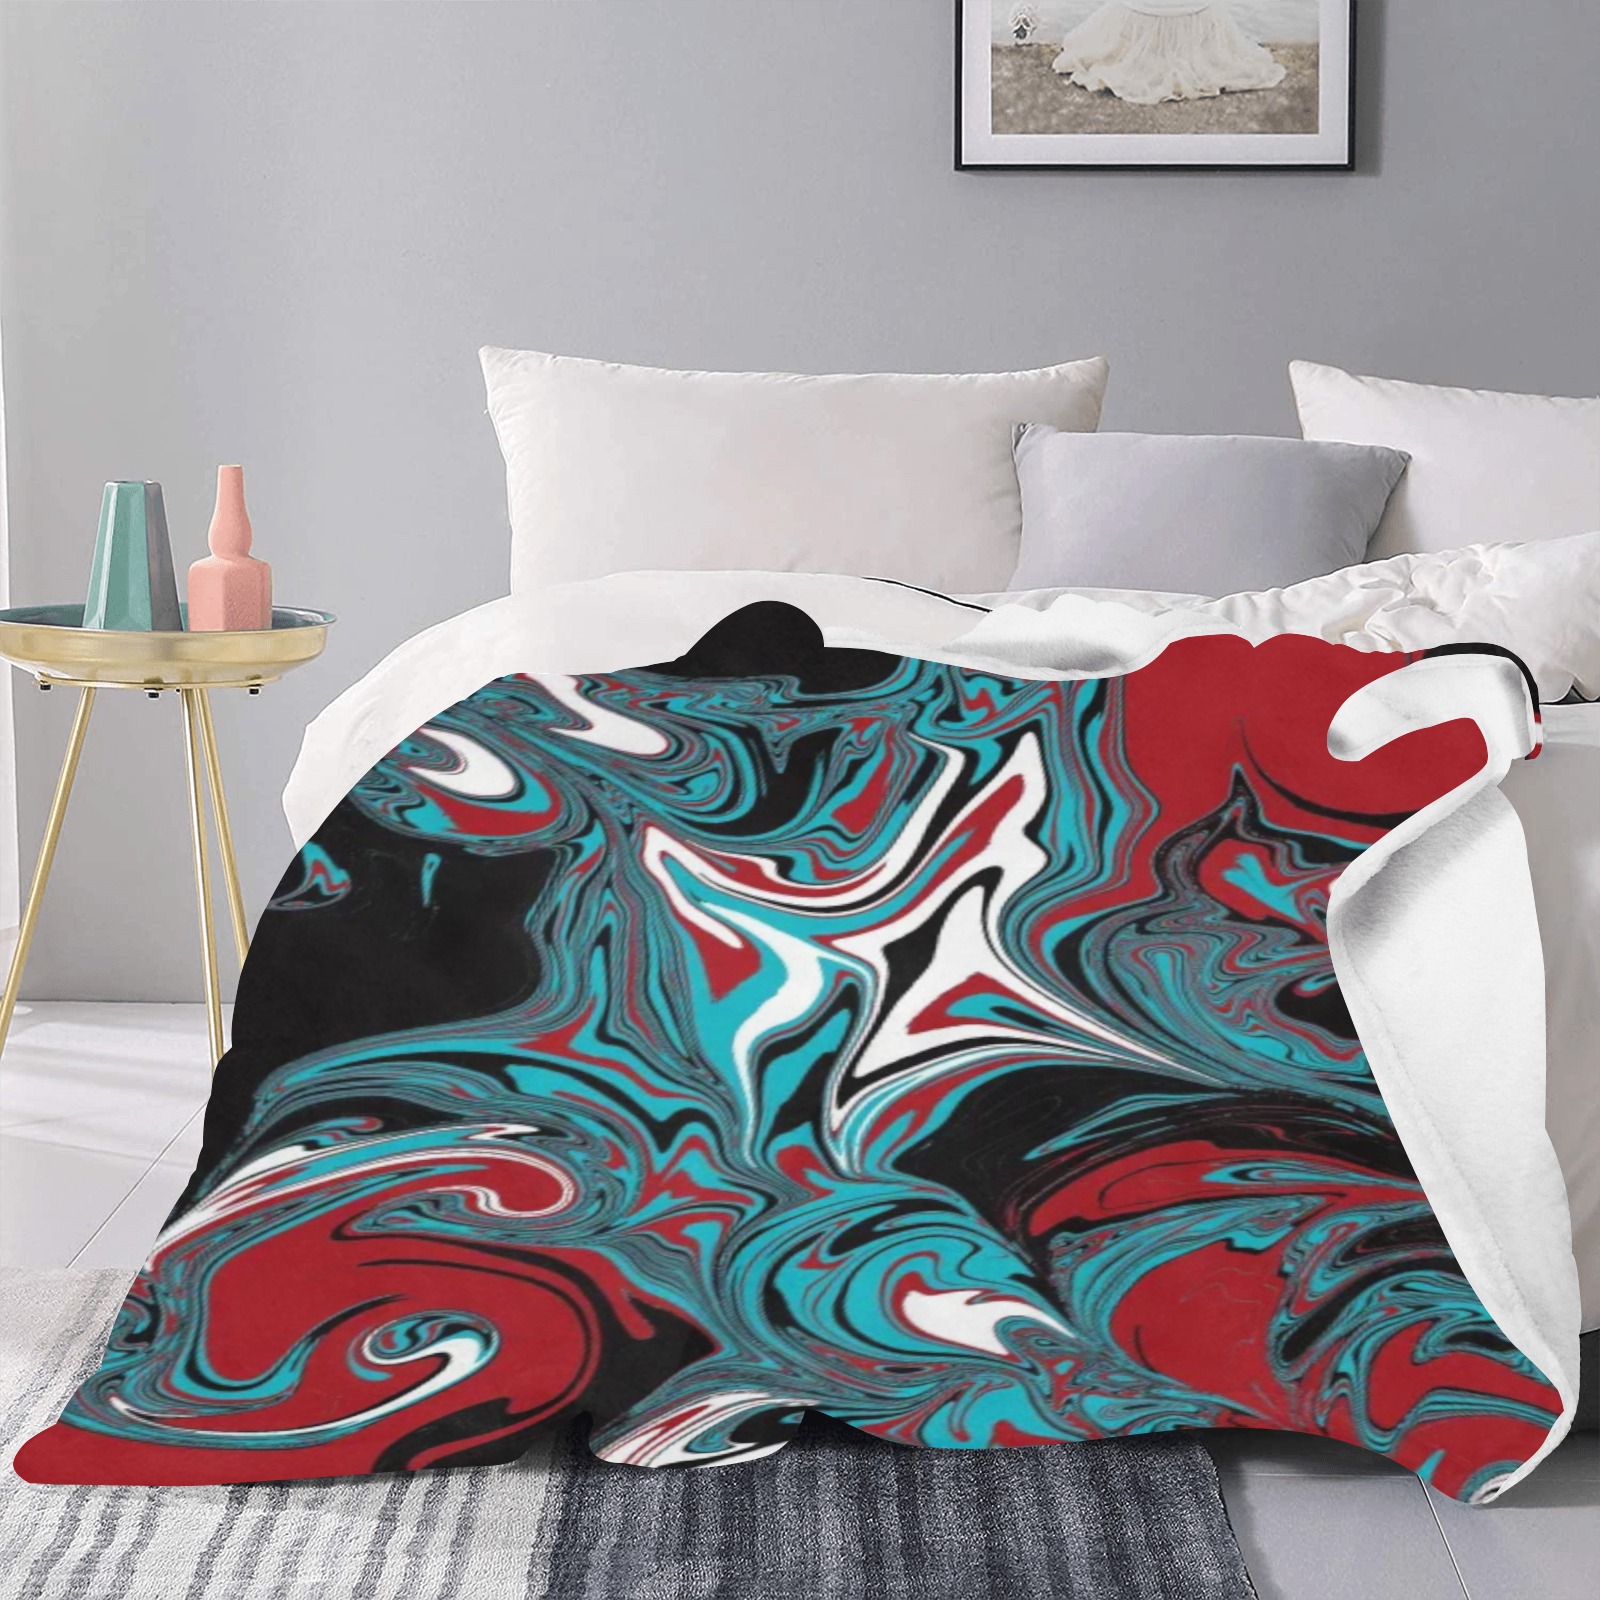 Dark Wave of Colors Ultra-Soft Micro Fleece Blanket 40"x50" (Thick)